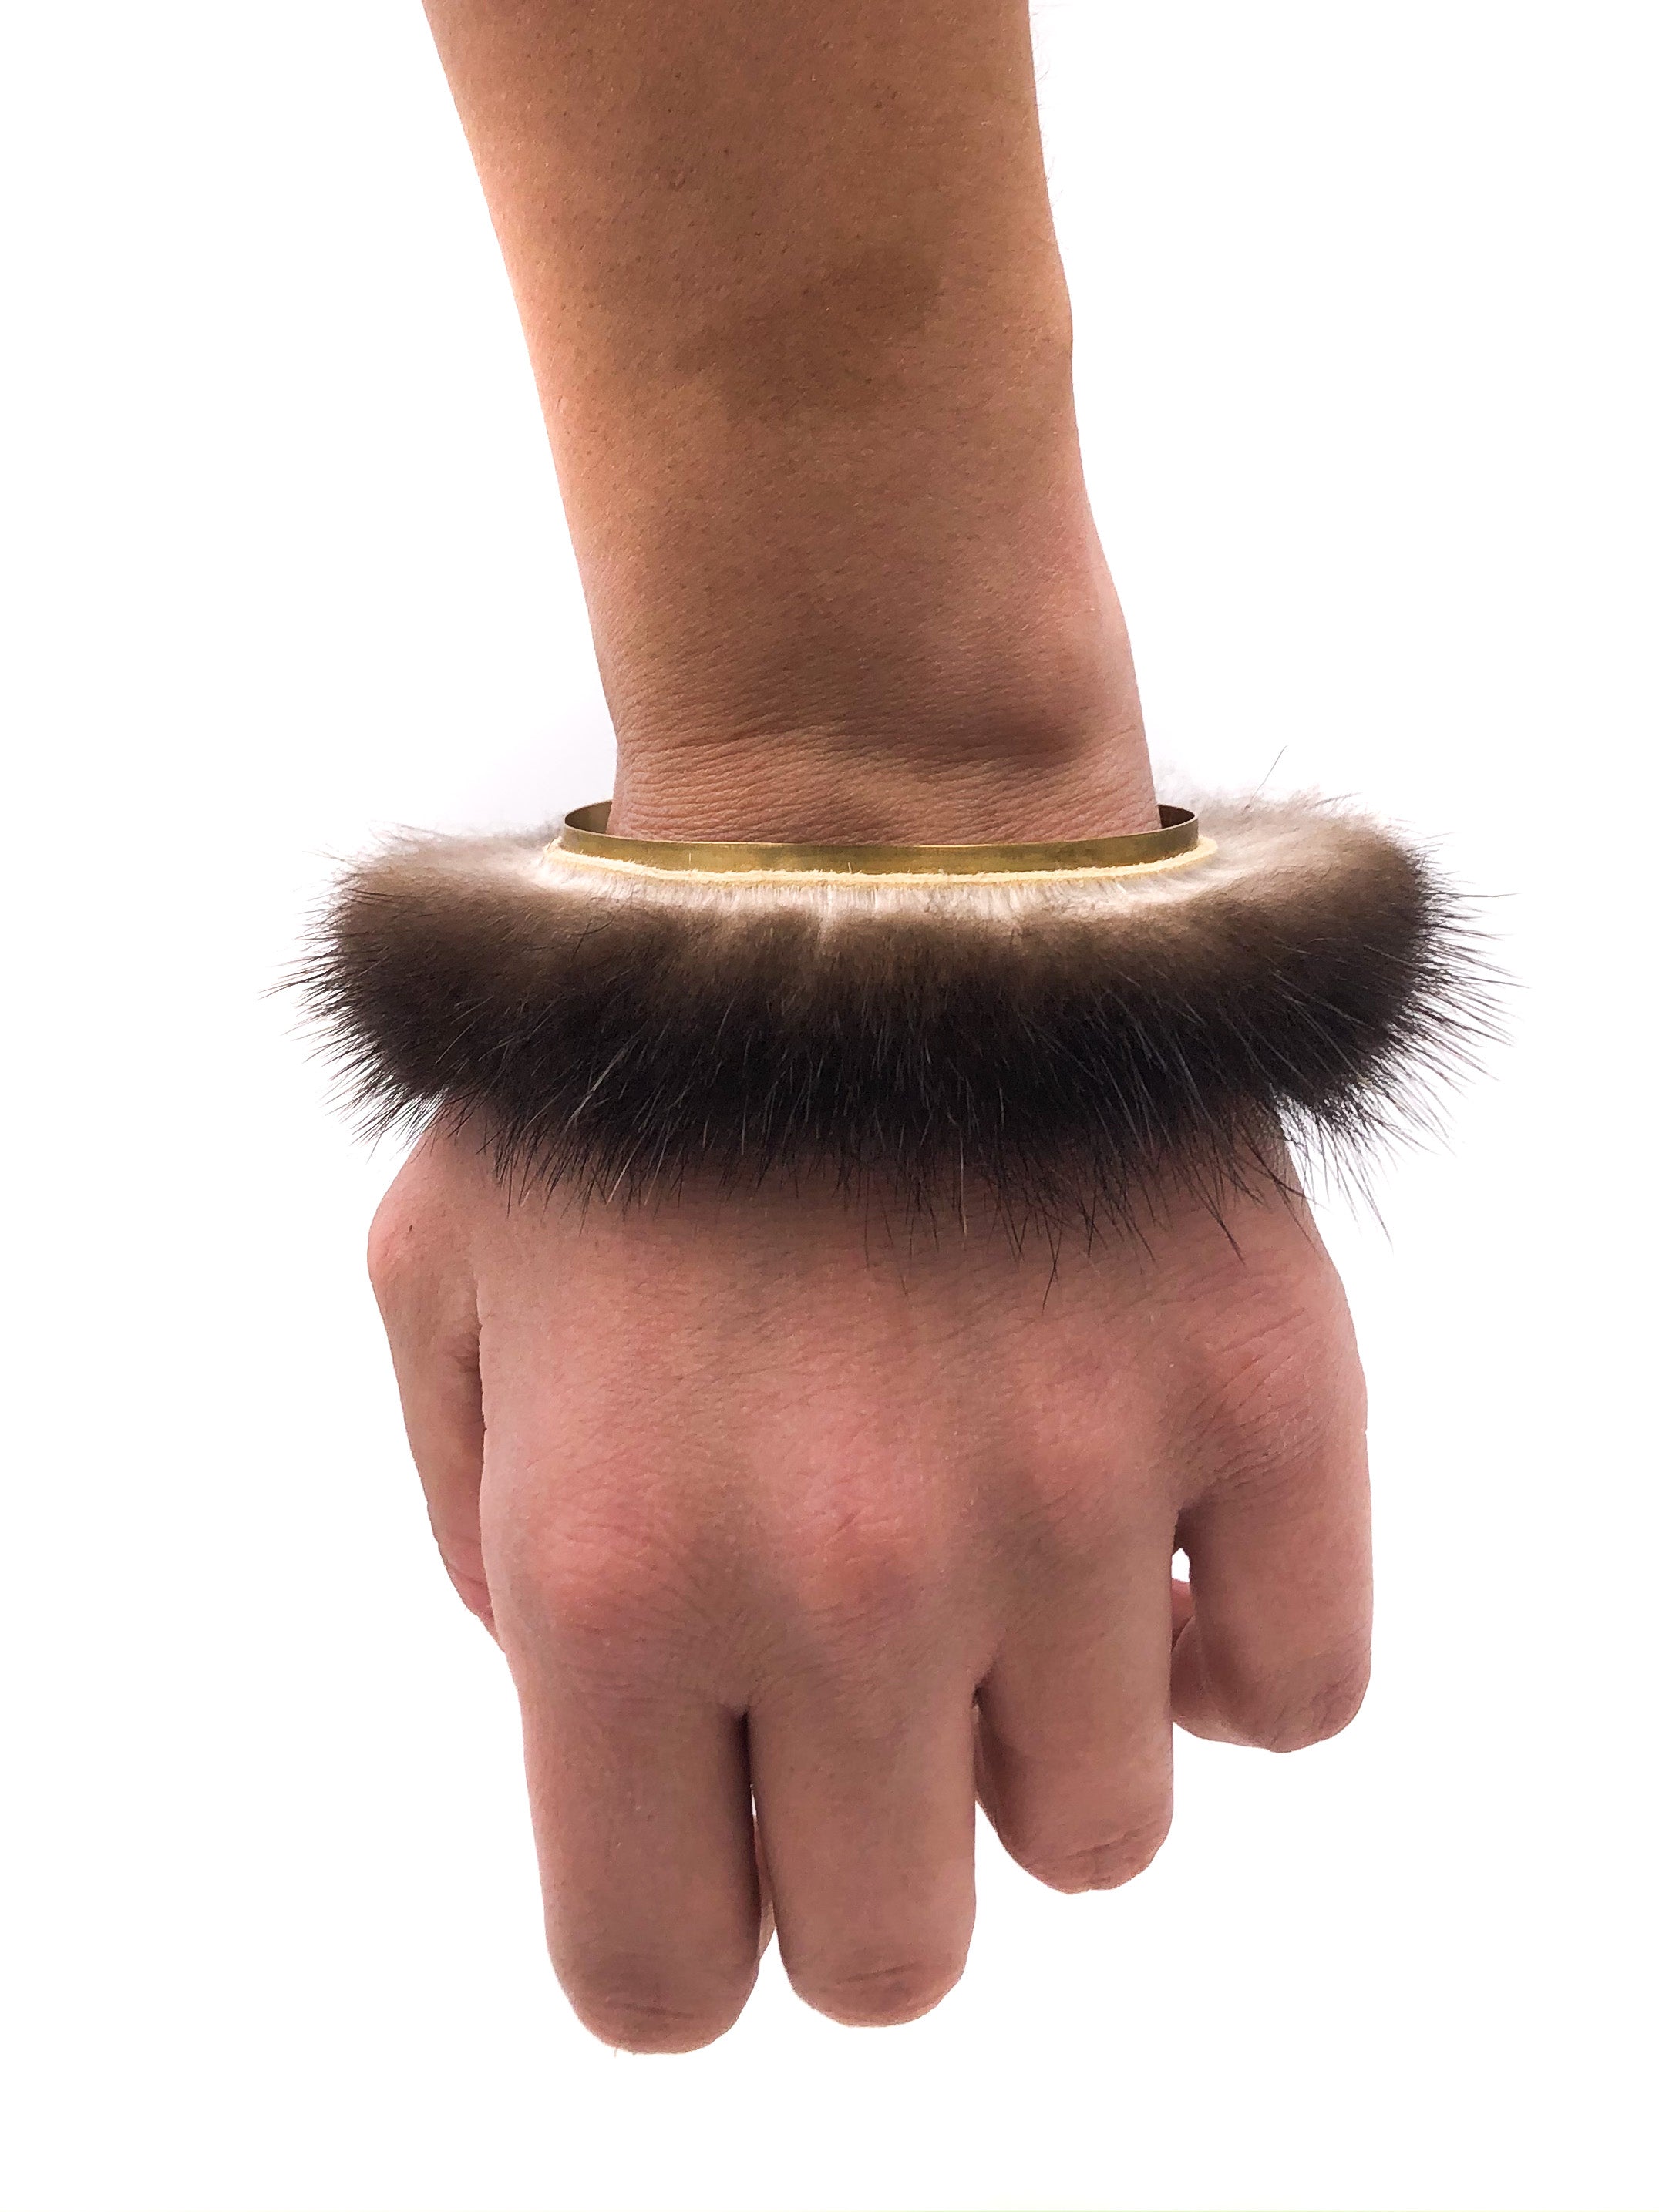 Fur bracelet with brass adornment and a little bit of attitude 